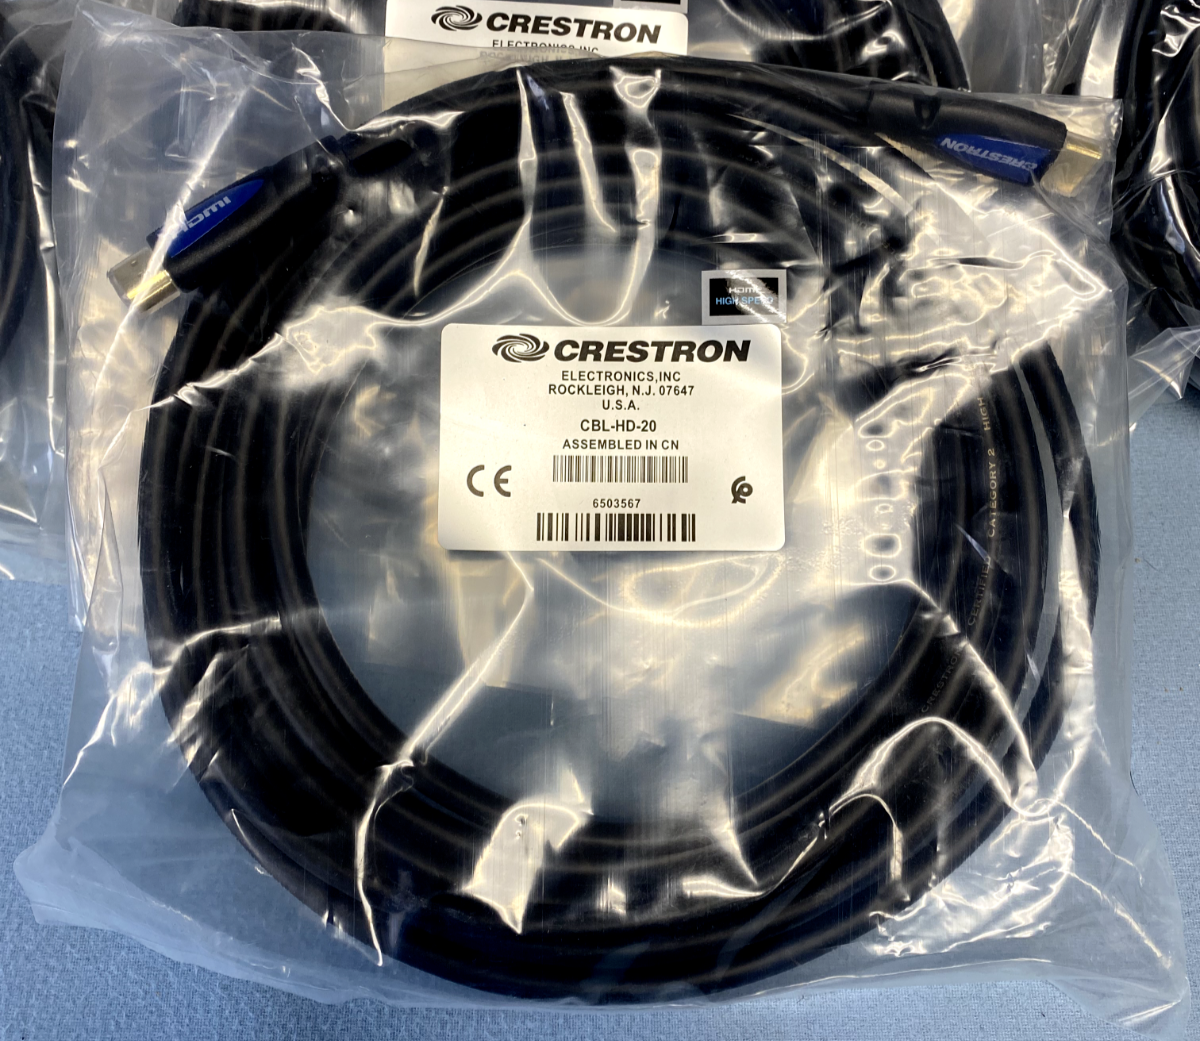 Crestron CBL-HD-20 Lot of 10 HDMI Interface Cable, 18 Gbps, 20 ft 6503567